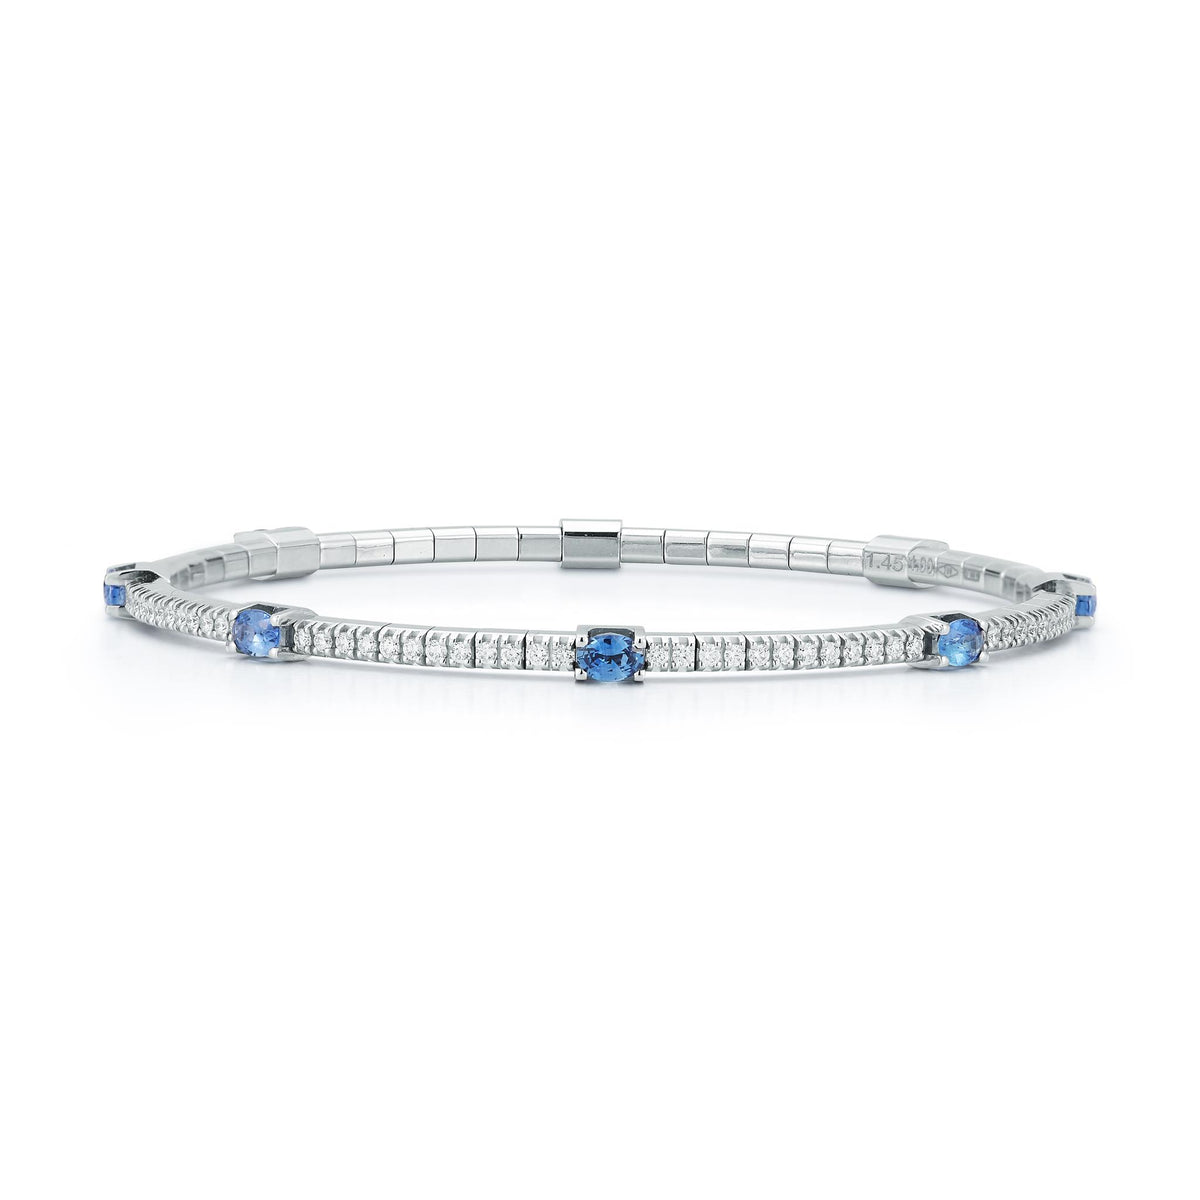 18Kt White Gold Extensible Bangle Bracelet With 2cttw Natural Diamonds and Sapphires